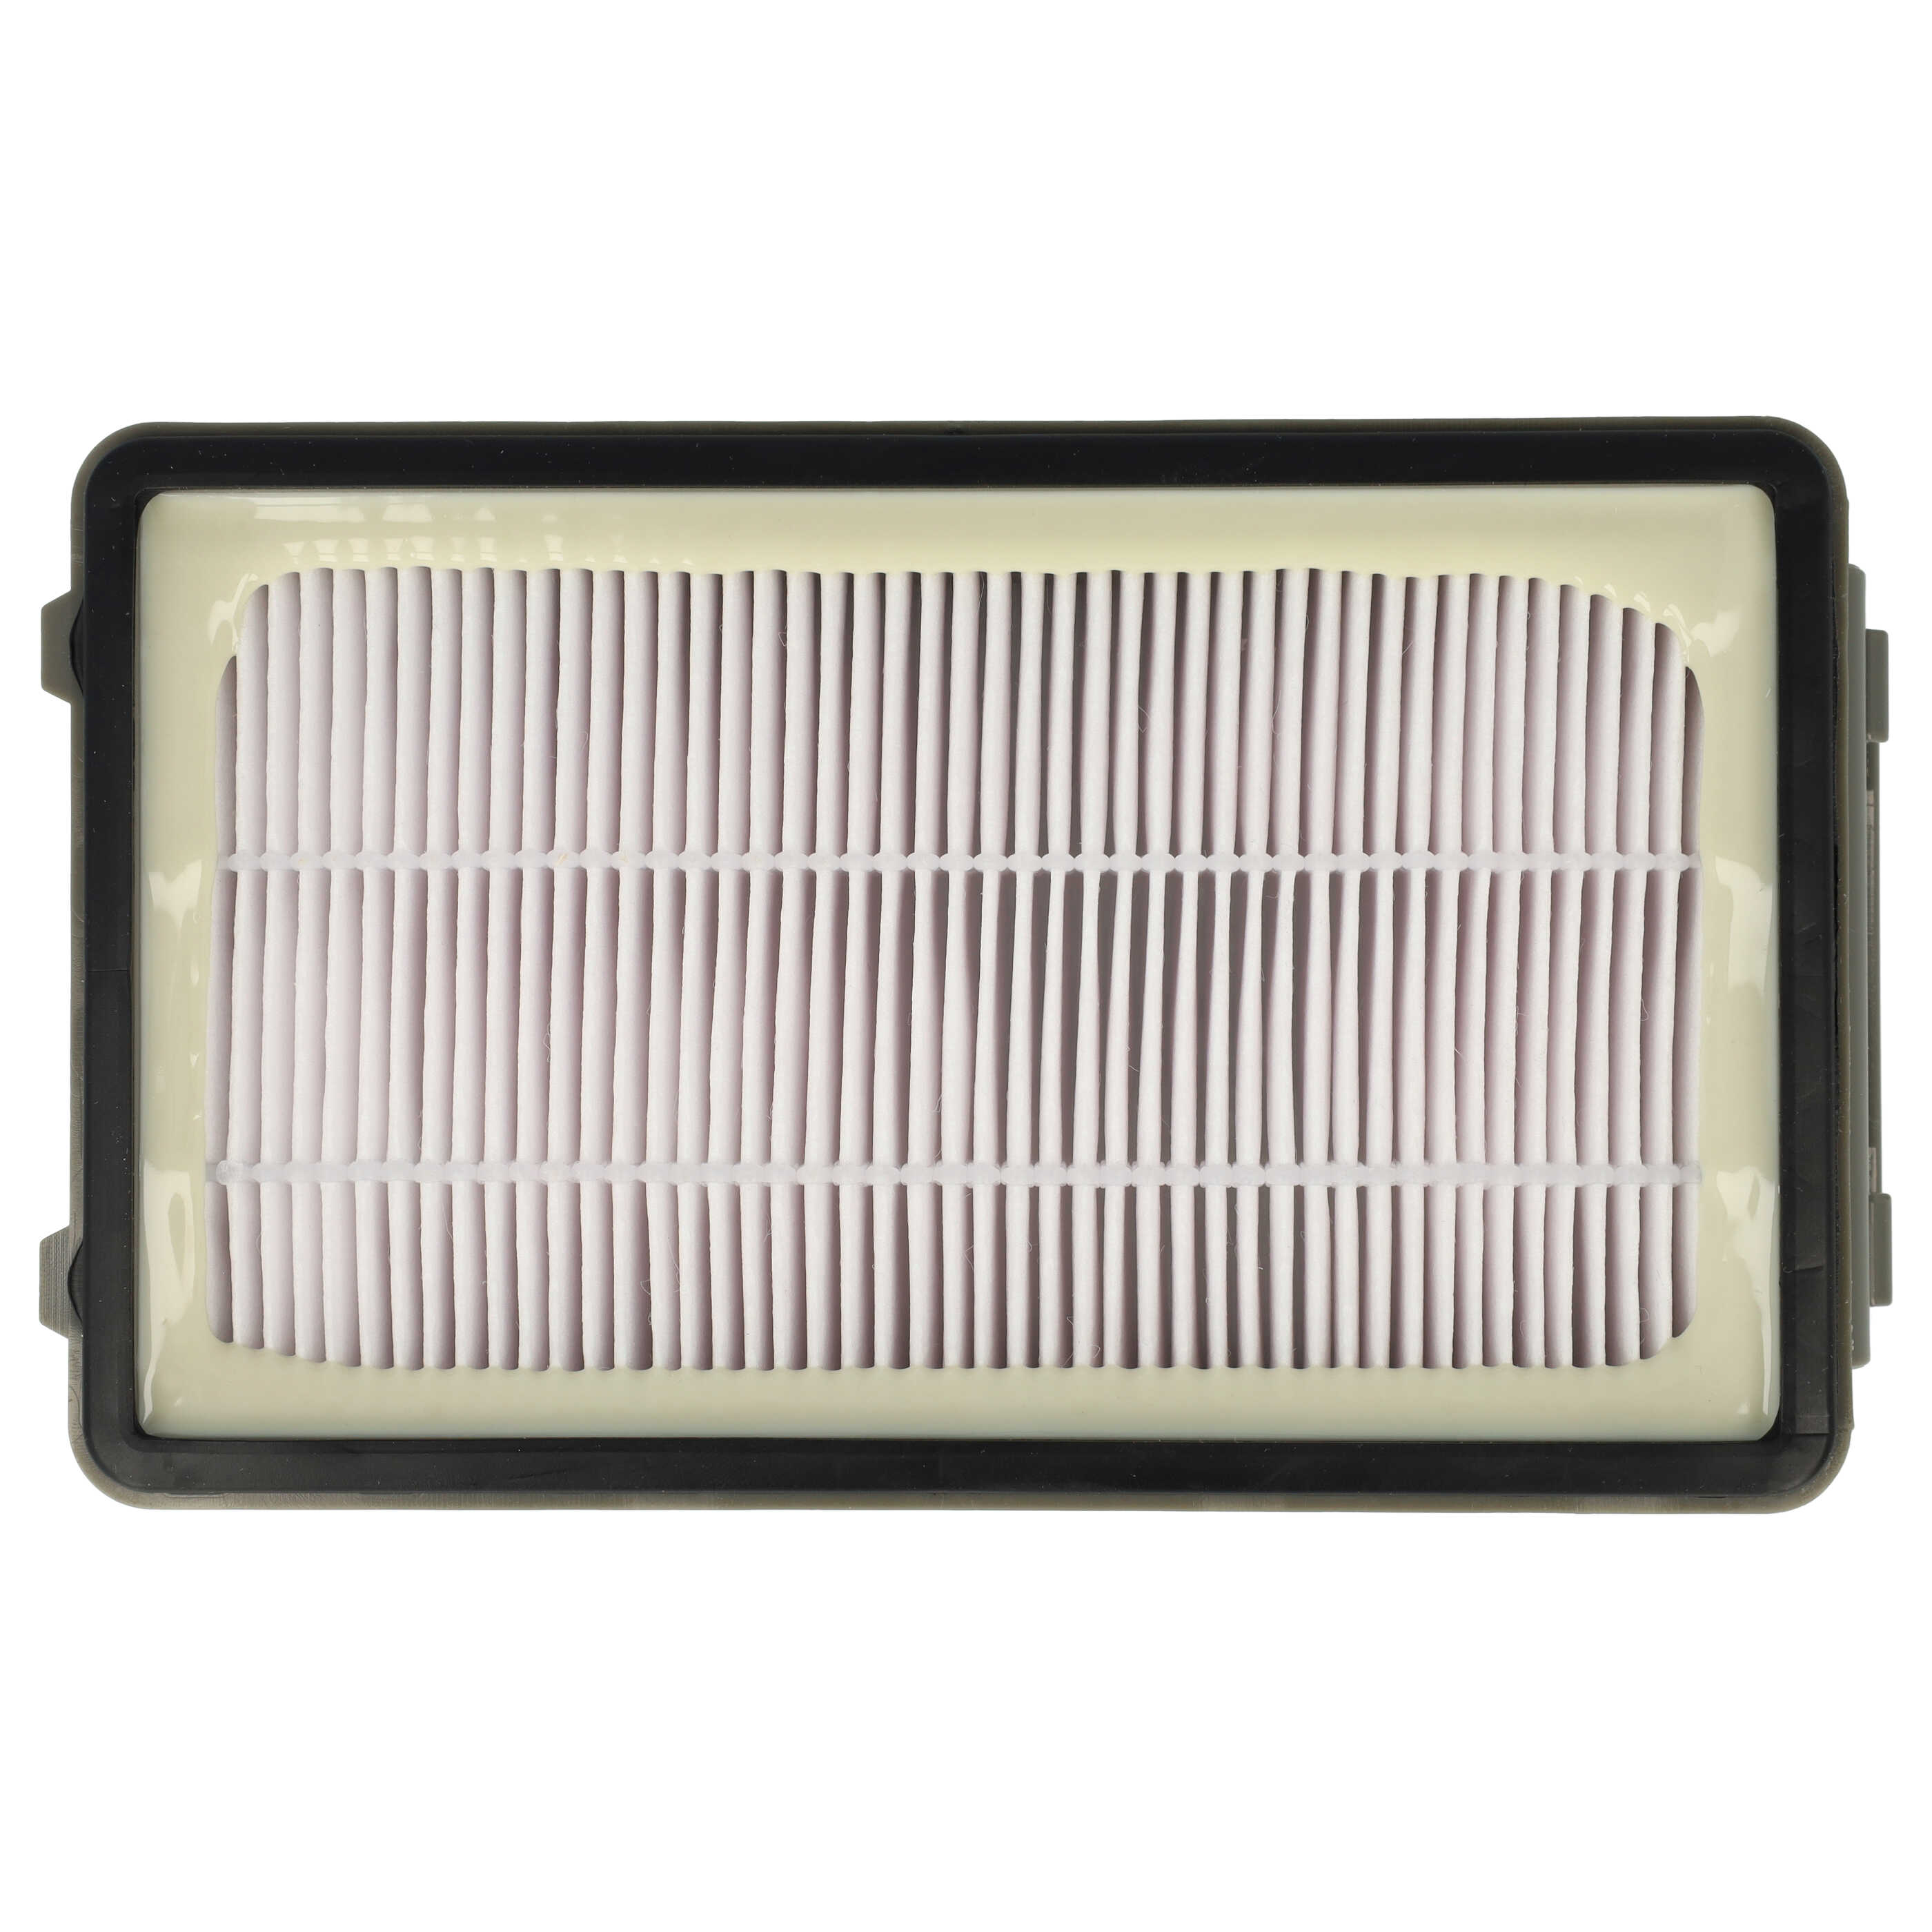 1x HEPA exhaust filter replaces Rowenta ZR903501, RS-RT900586 for Moulinex Vacuum Cleaner